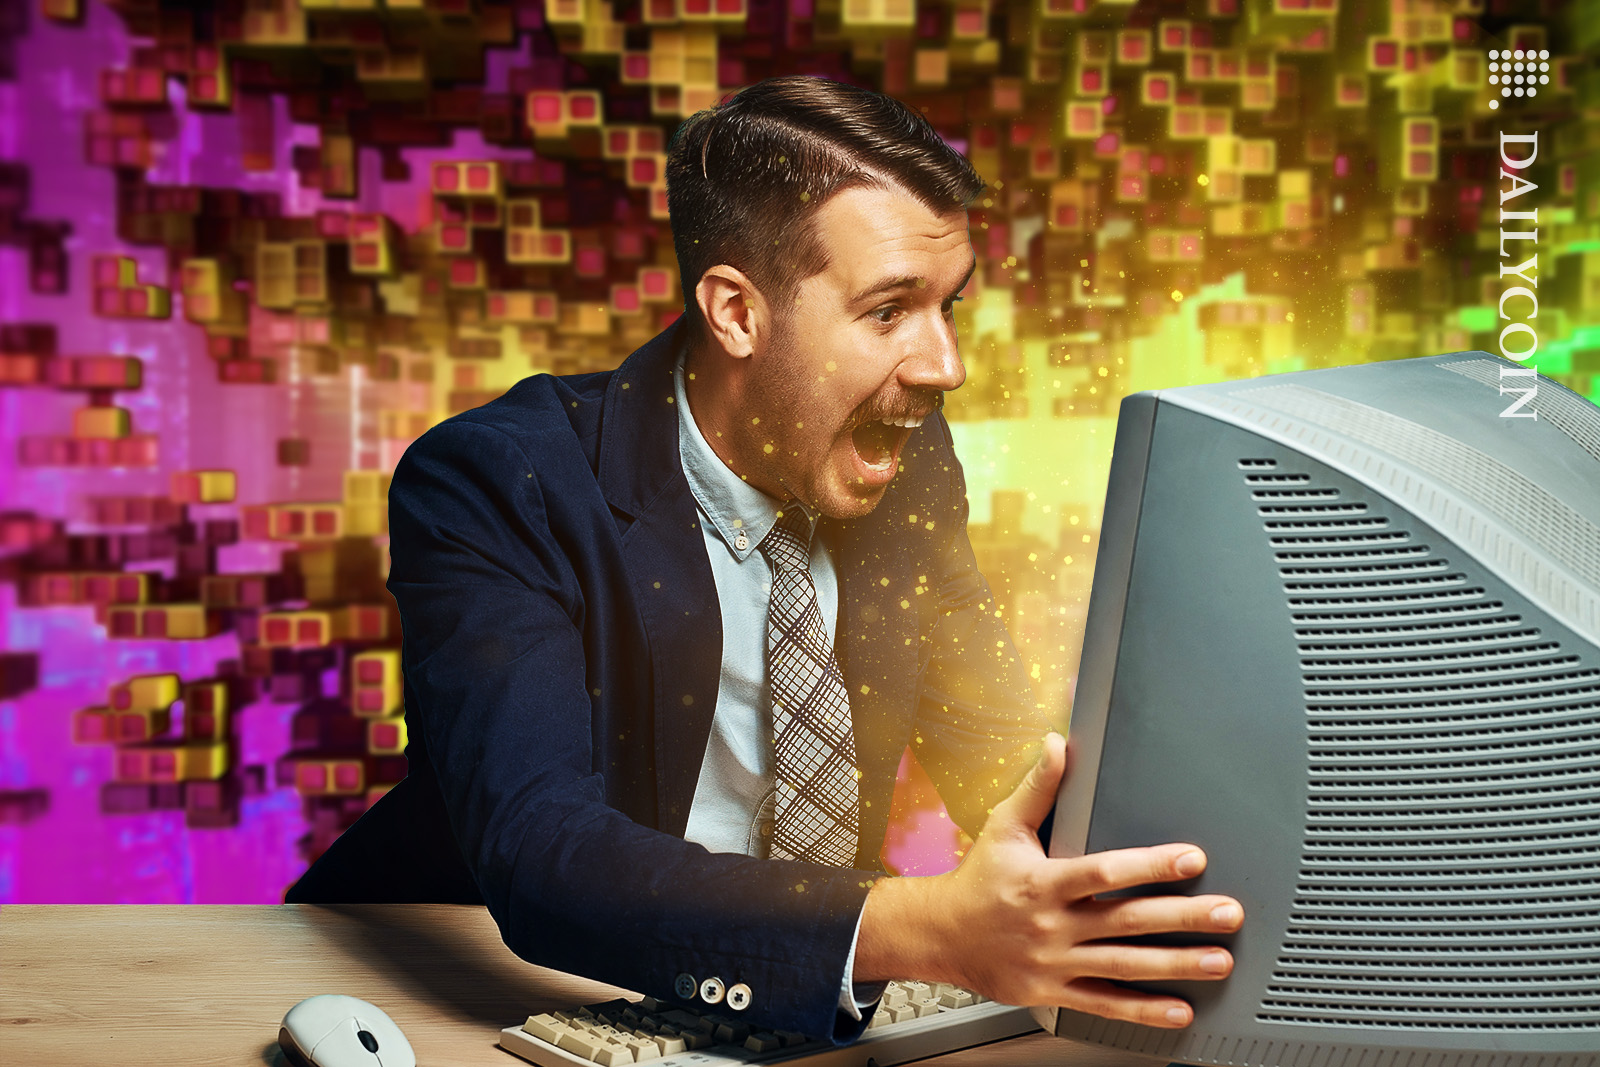 Man holding the computer cannot believe the blockchain news.